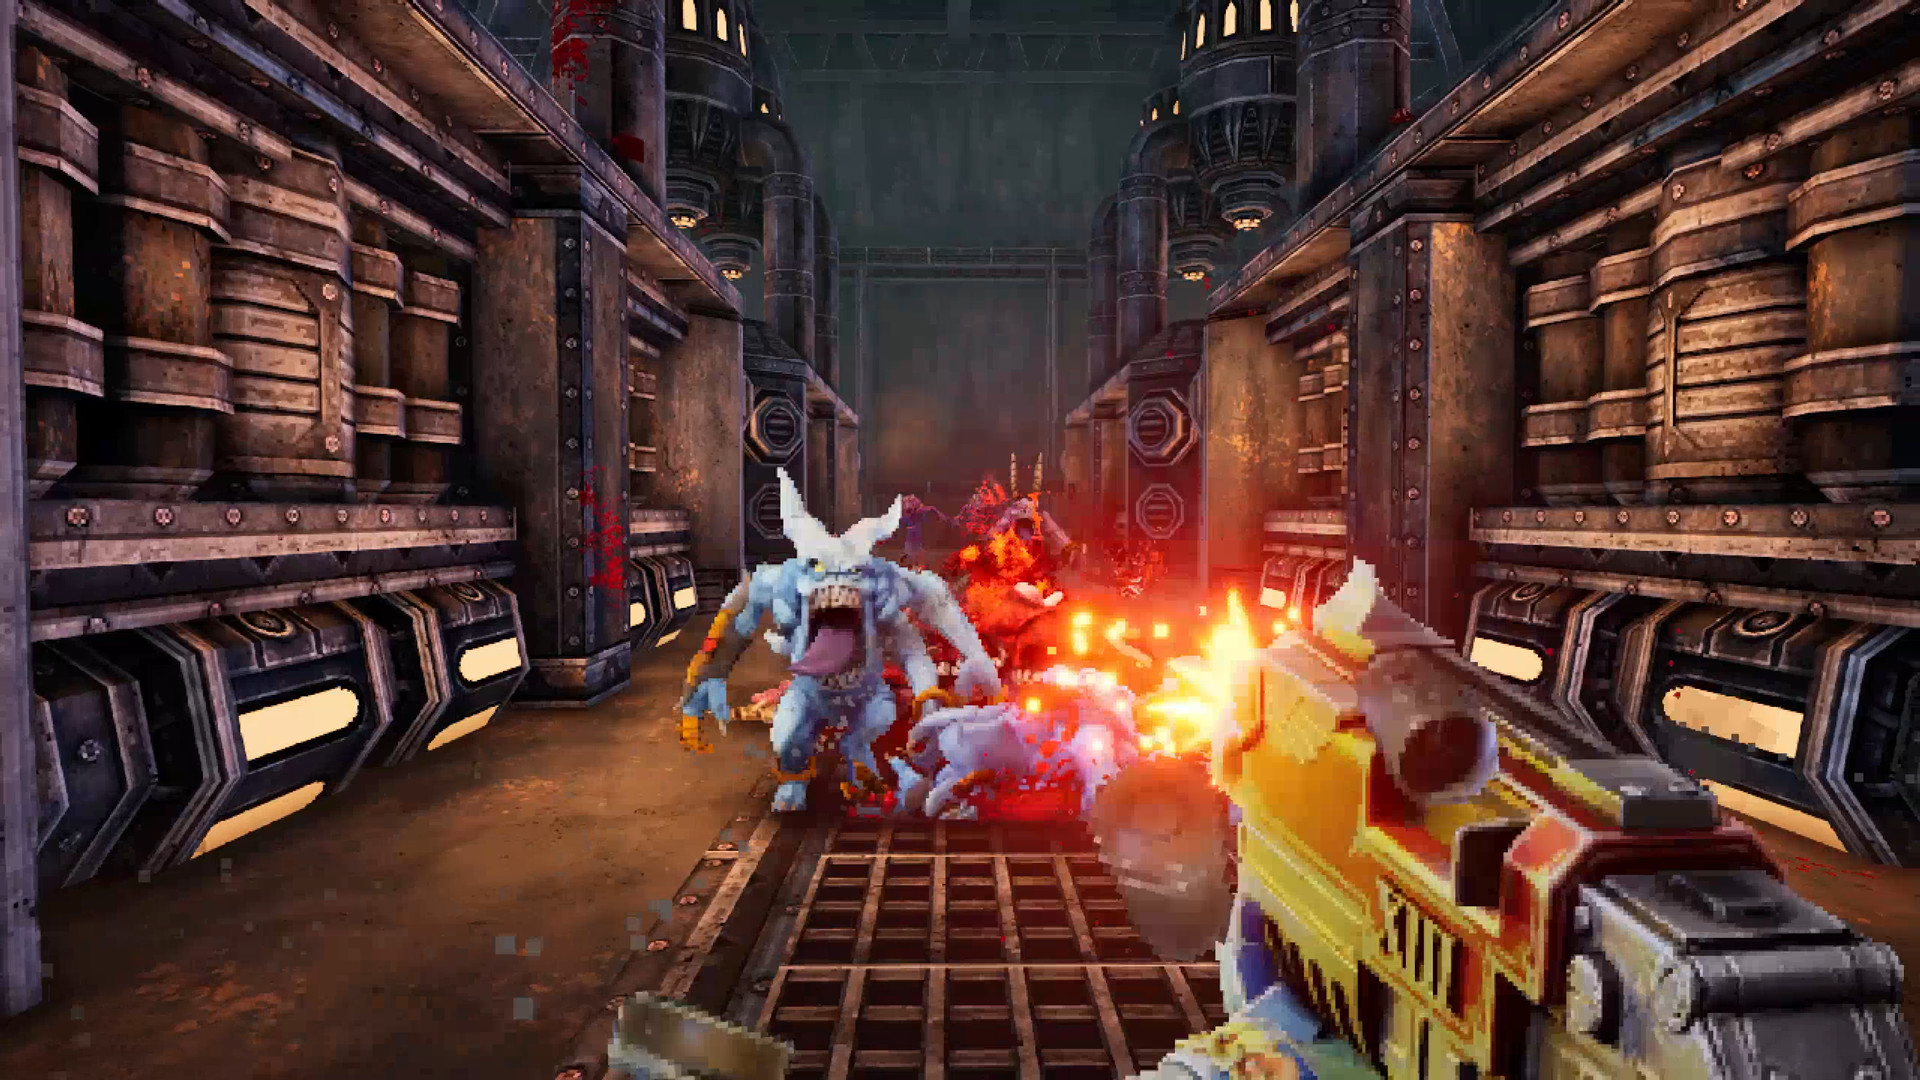 Warhammer 40,000 Boltgun is a 90s-style FPS coming to PC next year